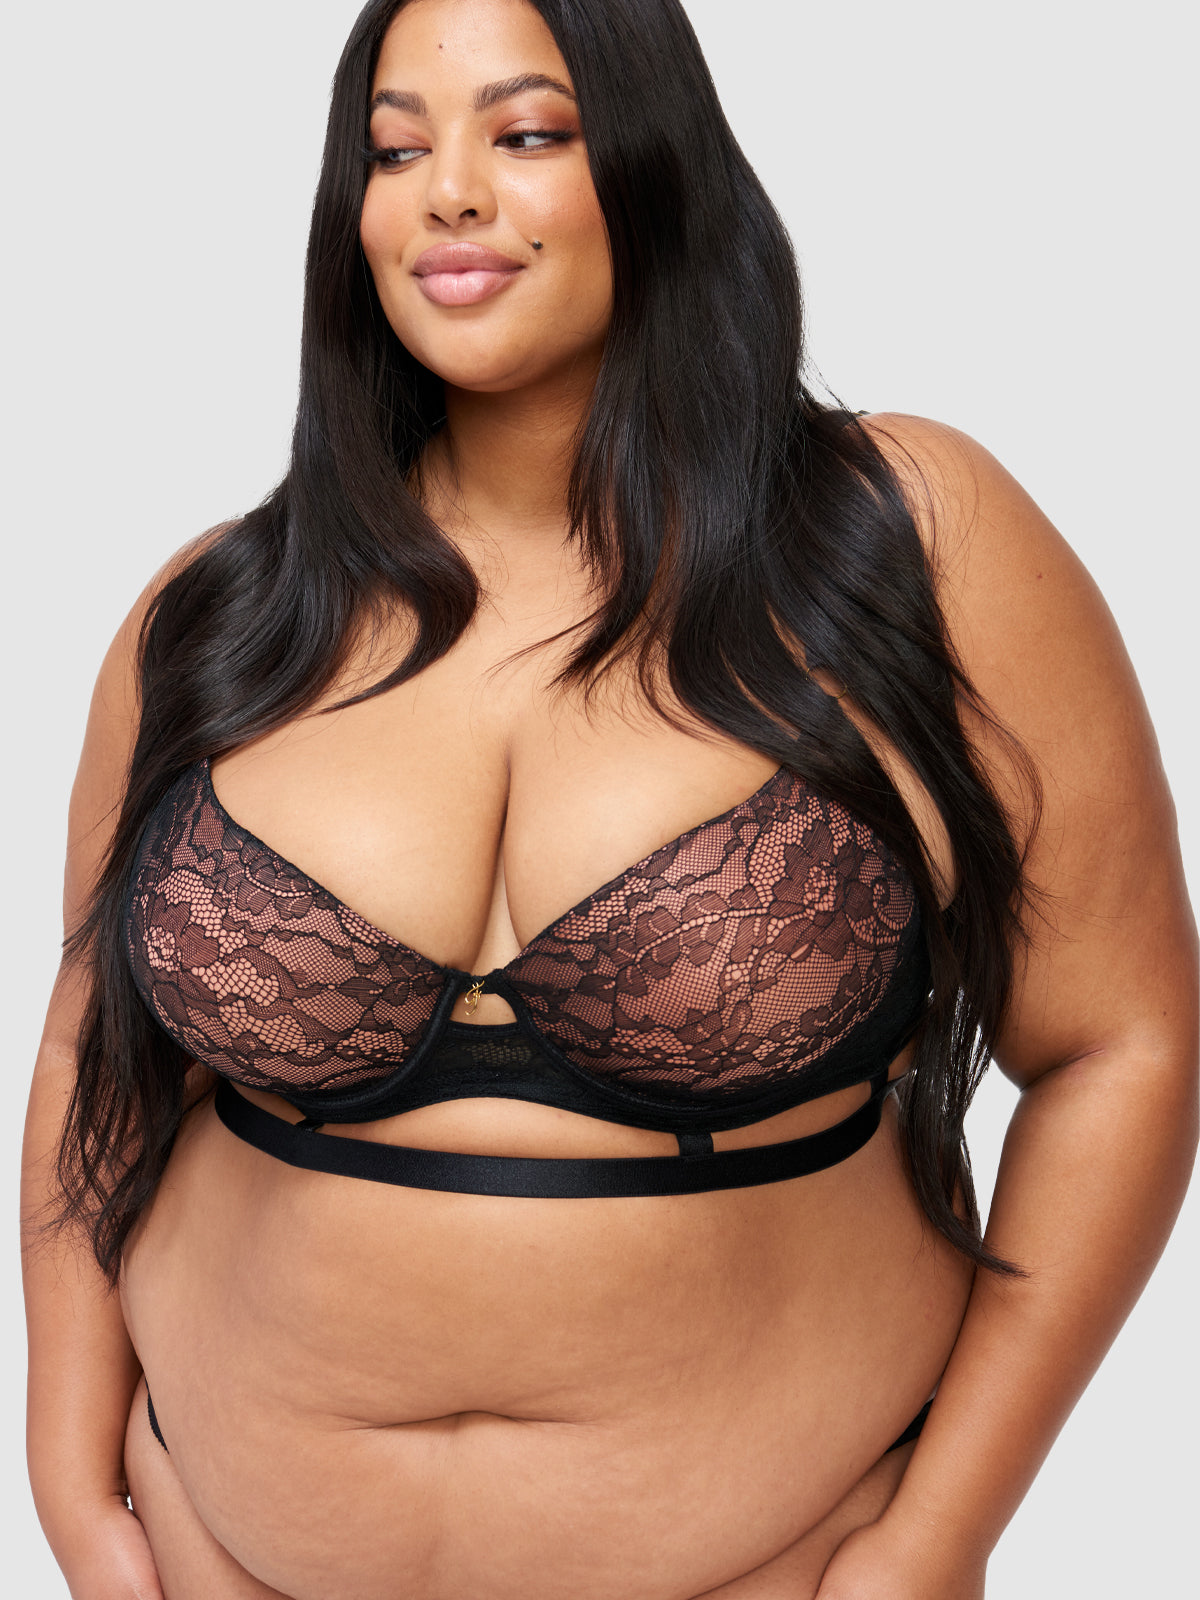 Womens Sexy Foral Lace Push Up Bra Sets Extreme Padded